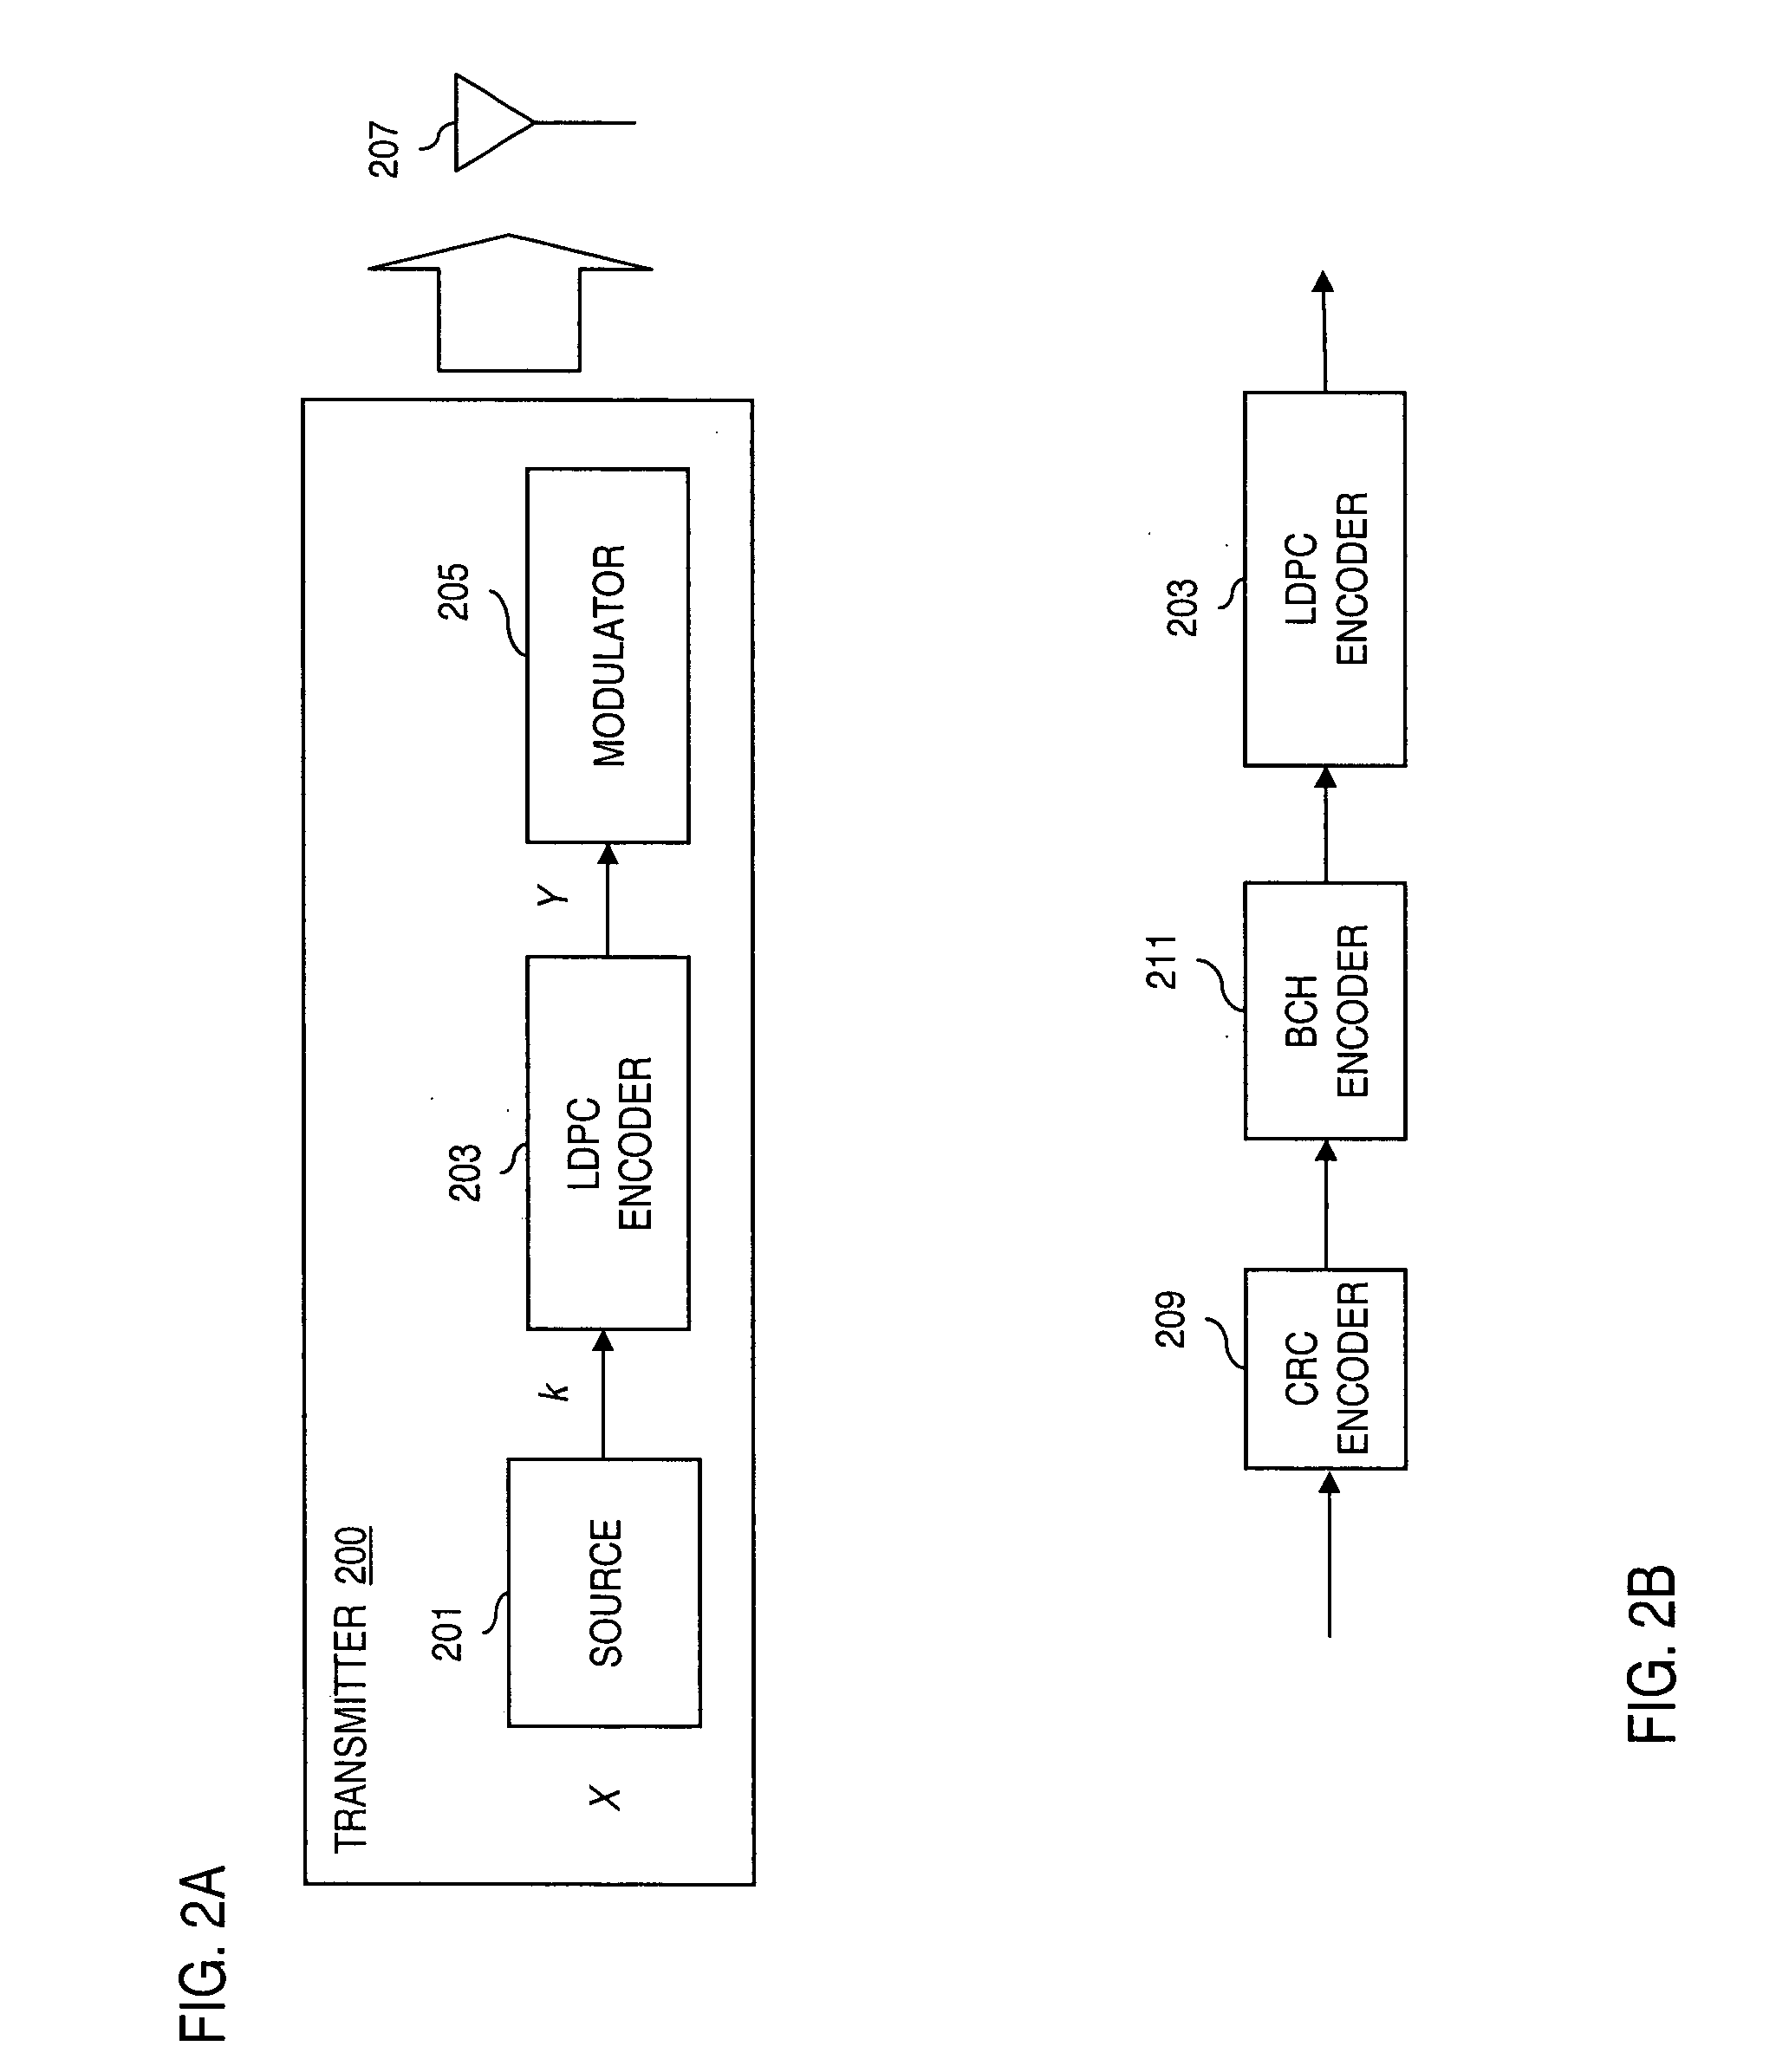 Method and system for providing low density parity check (LDPC) encoding